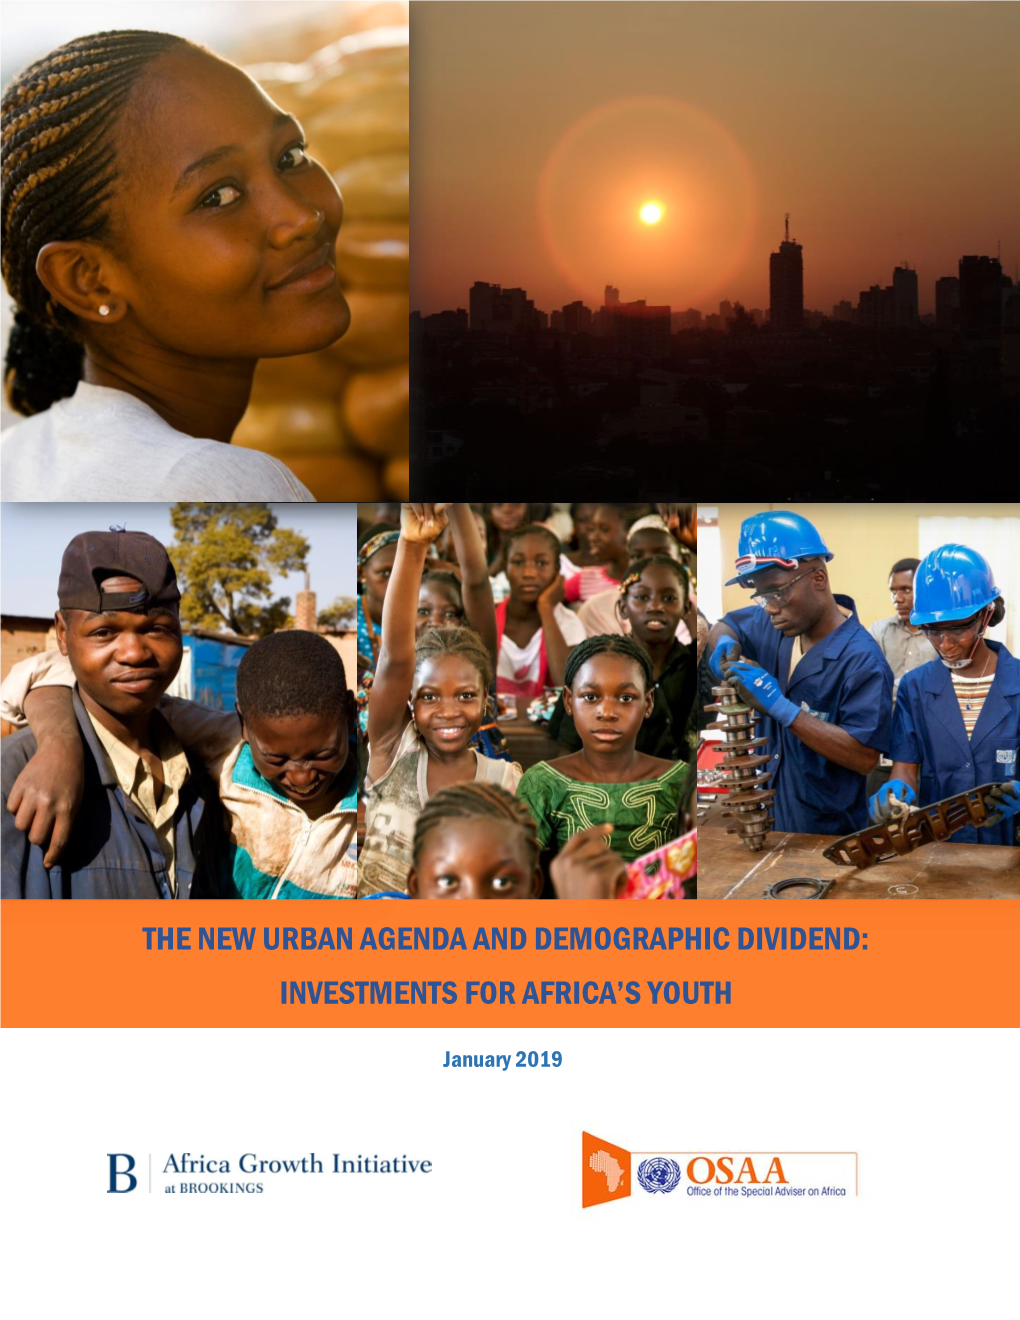 The New Urban Agenda and Demographic Dividend